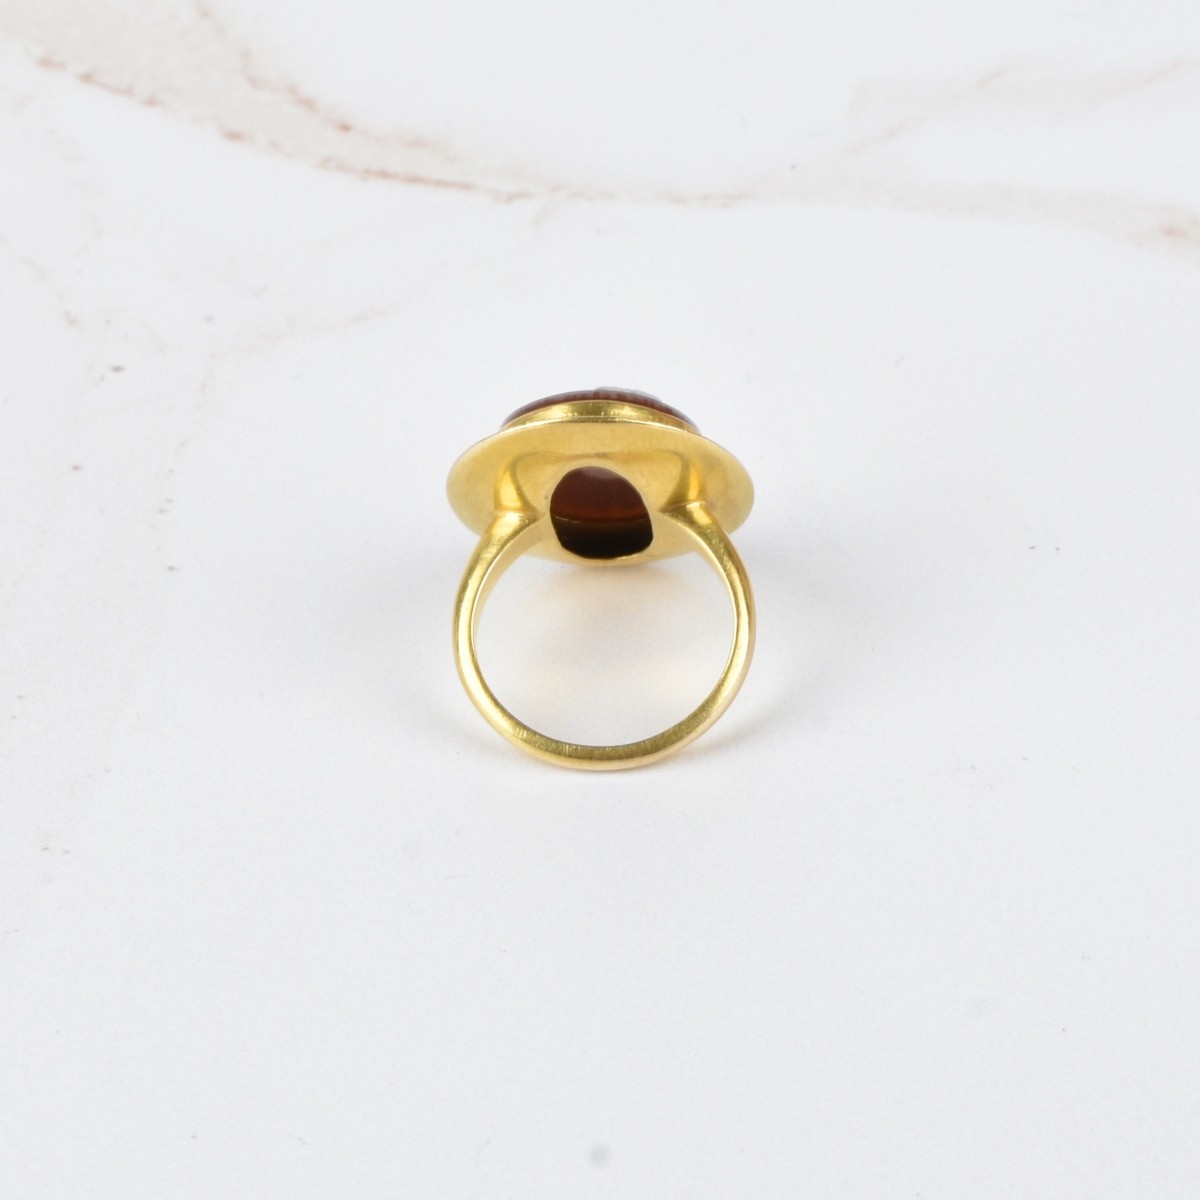 Antique Agate and 14K Ring